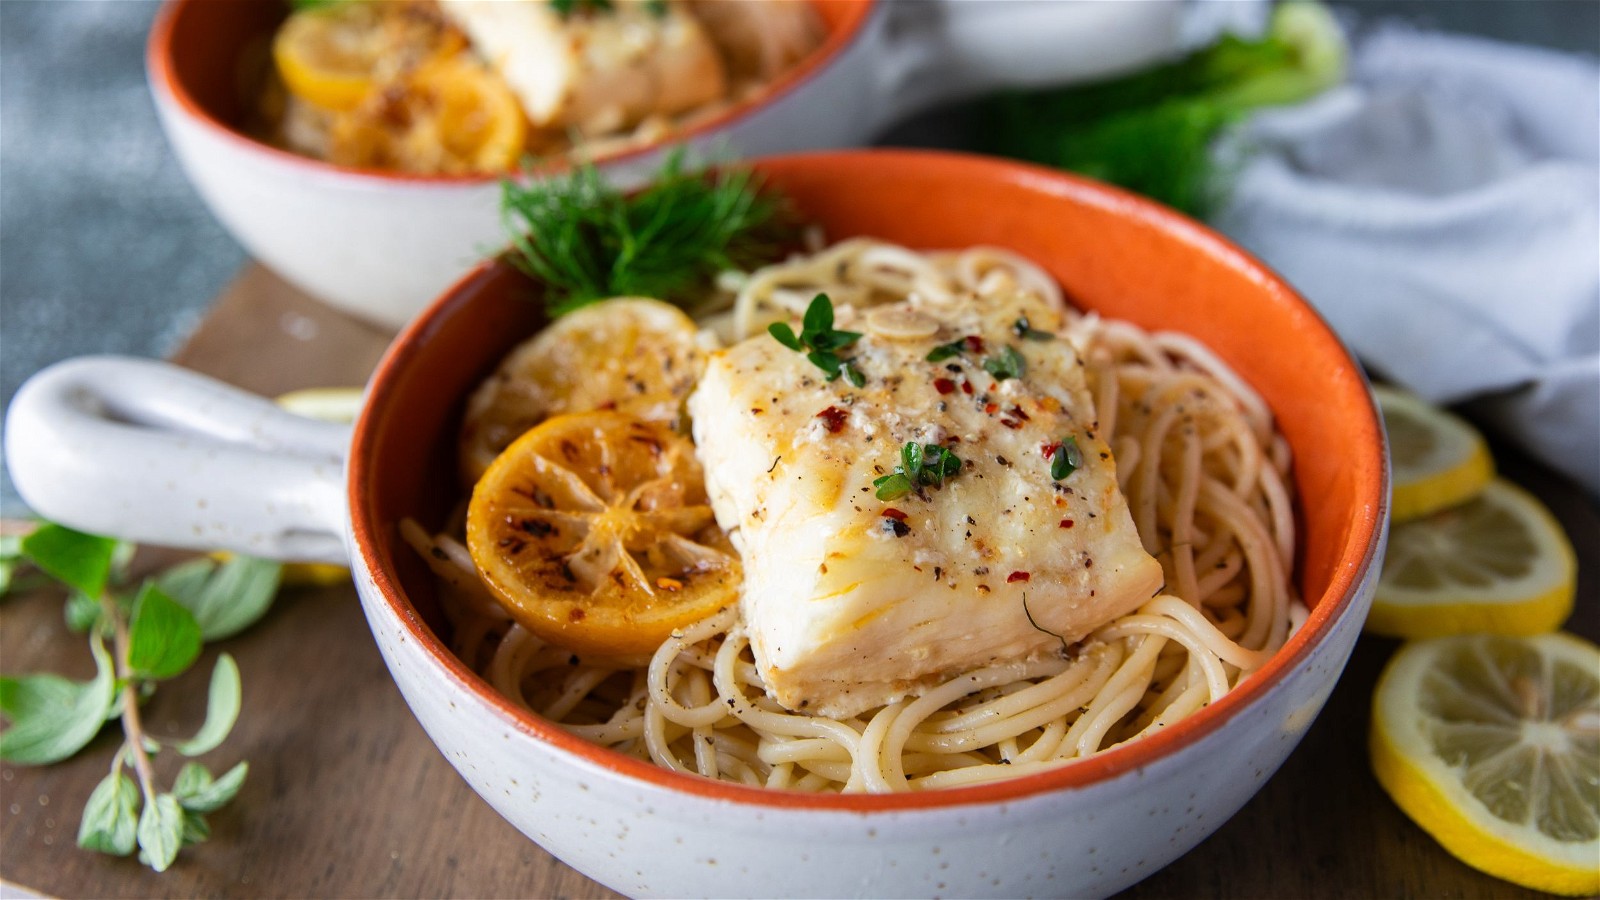 Image of Buttered Baked Halibut Over Pasta